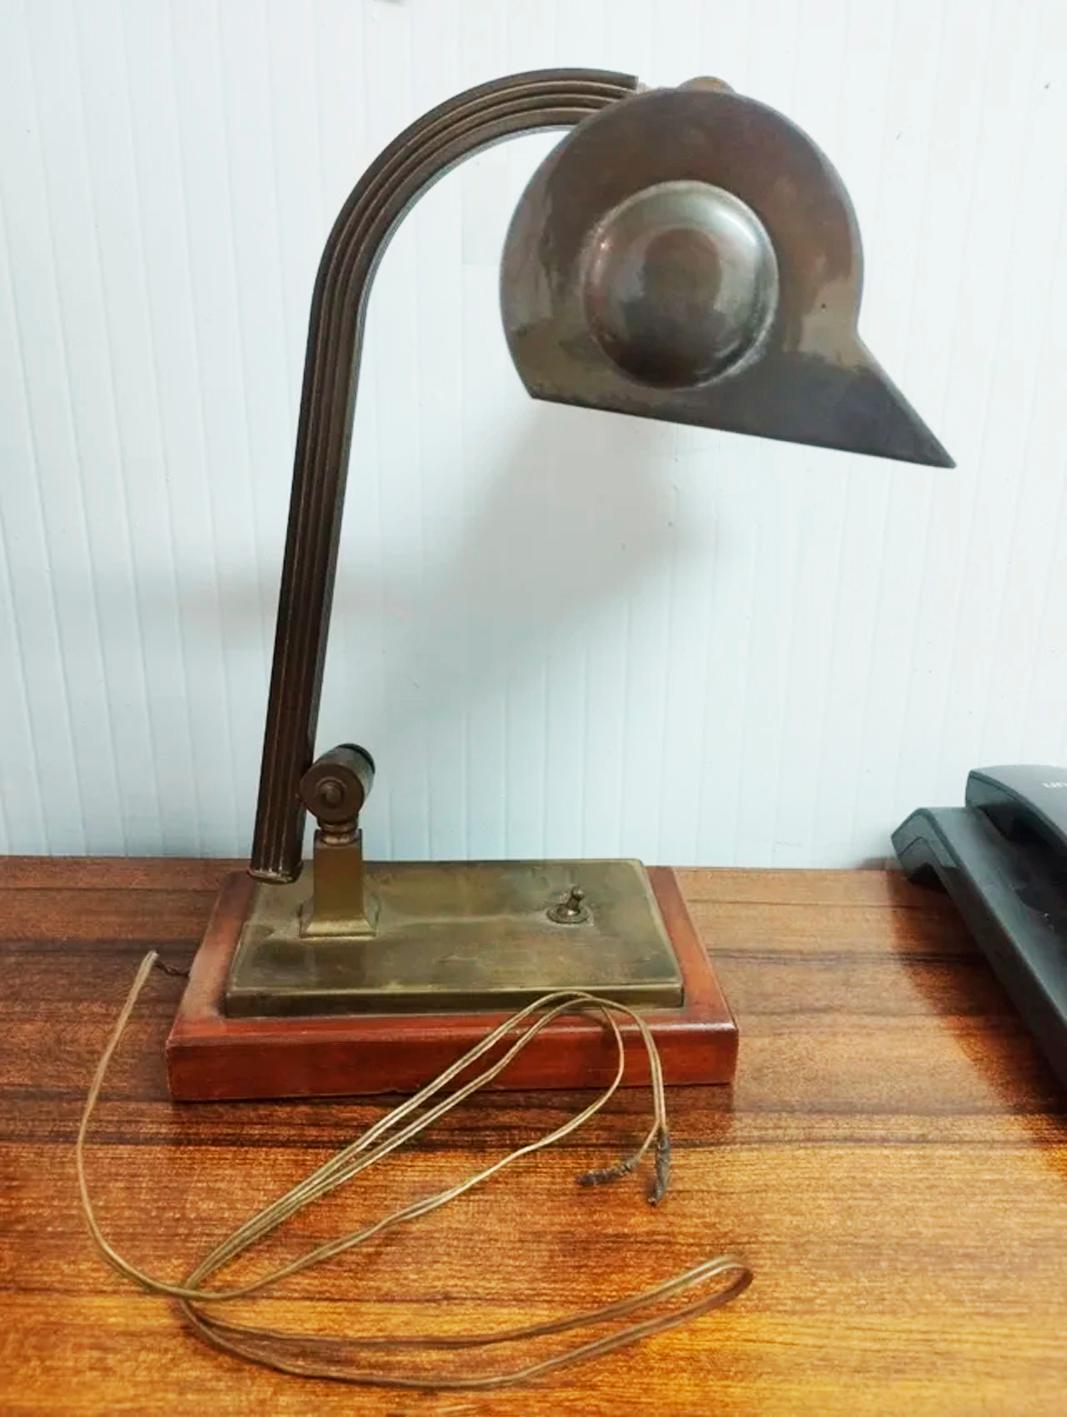  Ar Deco library lamp
Beautiful brass table  brass banker desk or library lamp, early  20th century, 

With the typical signs of the passage of time
Lamps for office, reading or for bedside.

The lamp in the images is with the patina of time, in its